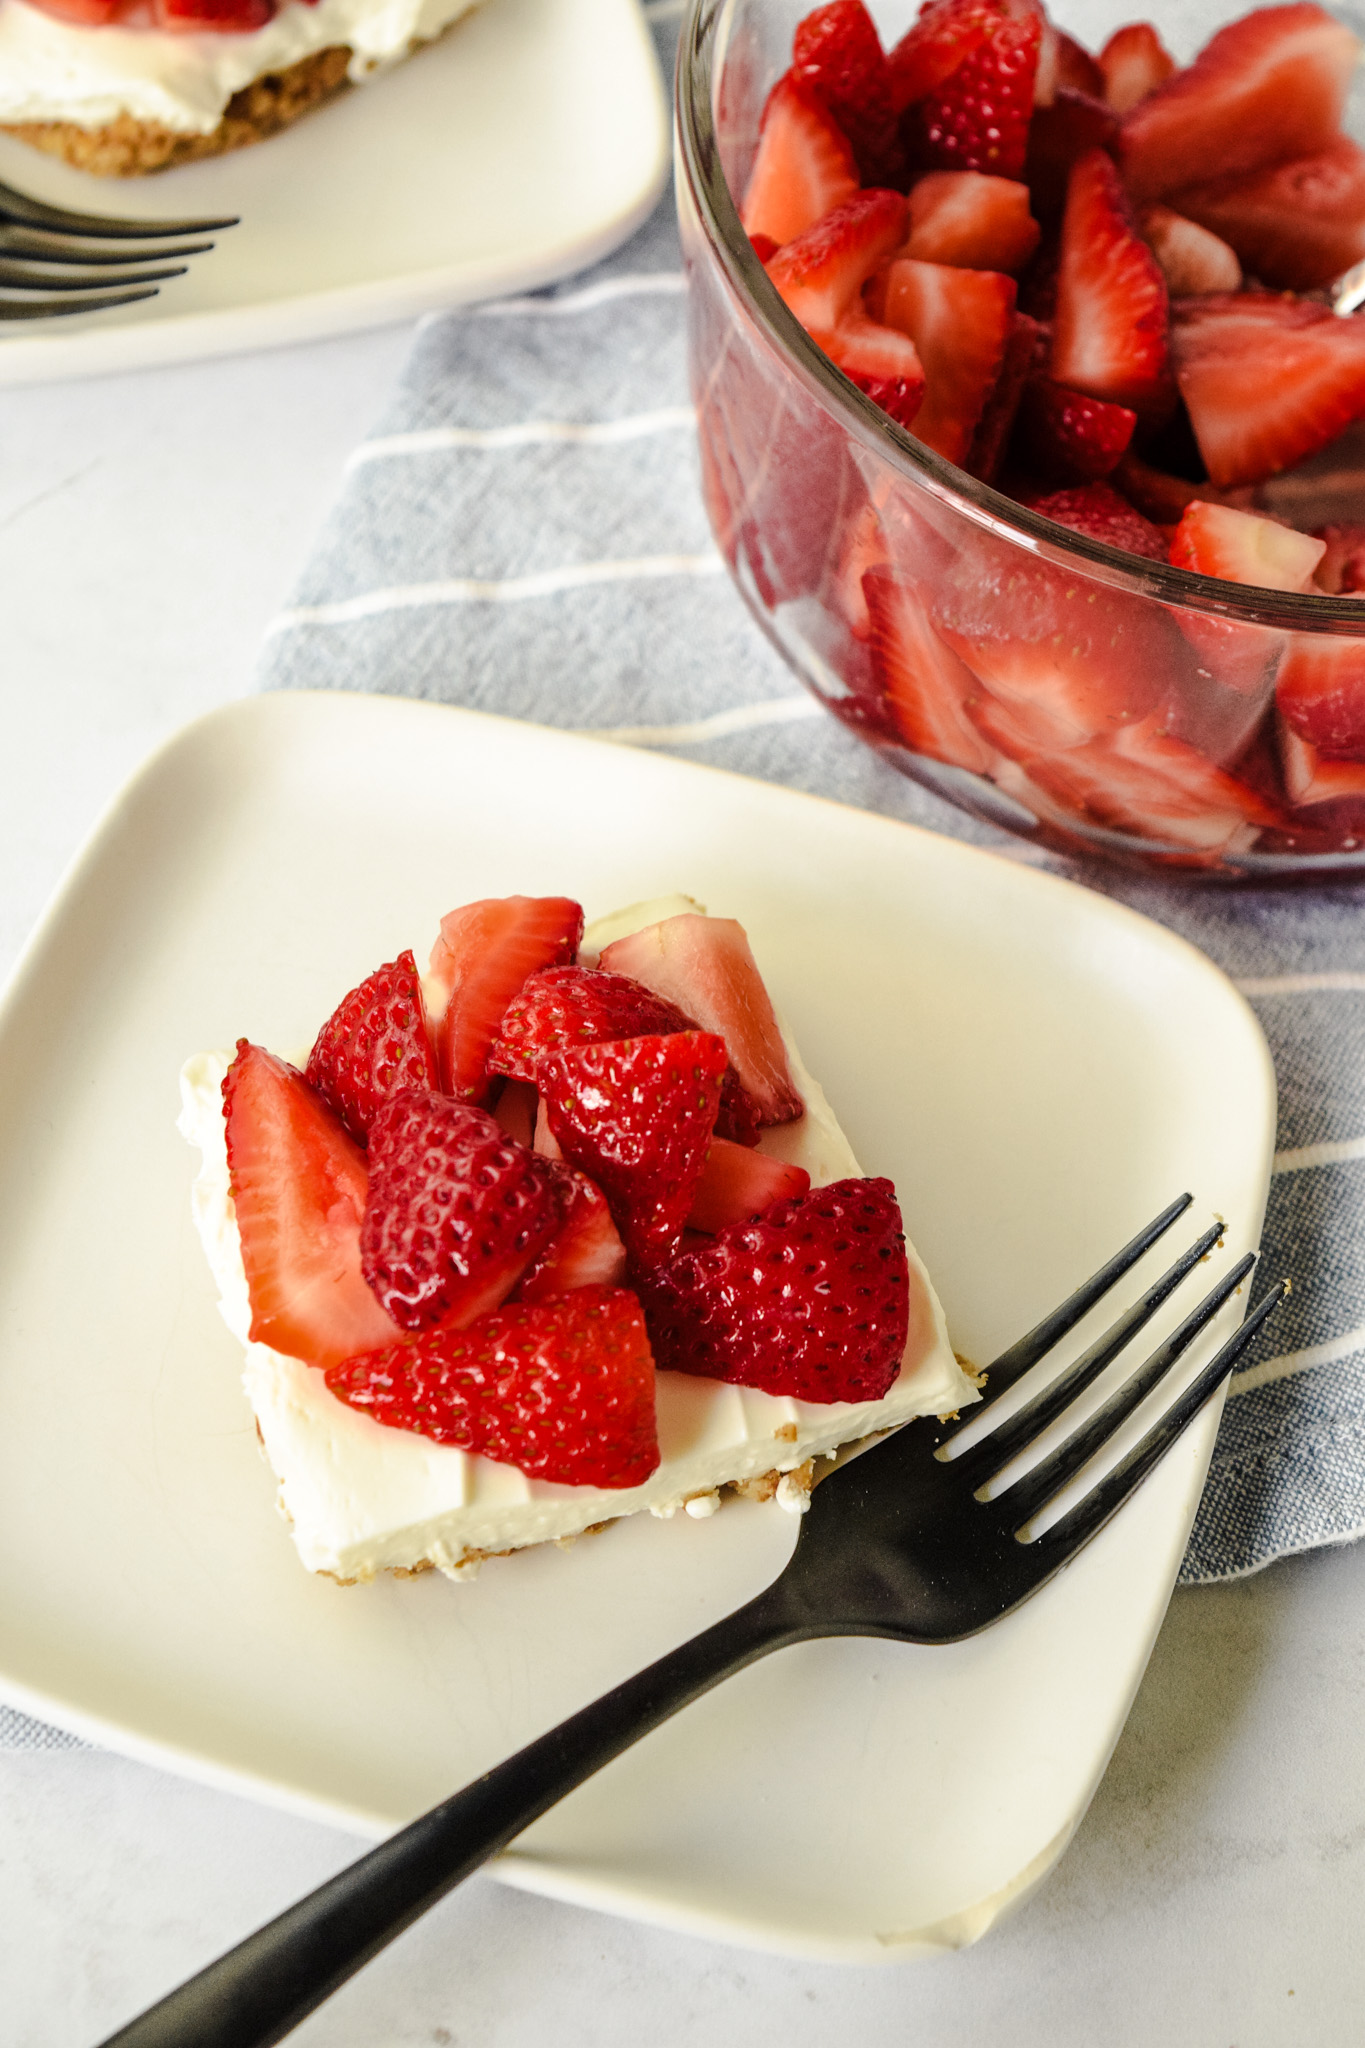 Gluten Free Pretzel Crust with Cream Cheese Filling and Fresh Strawberries